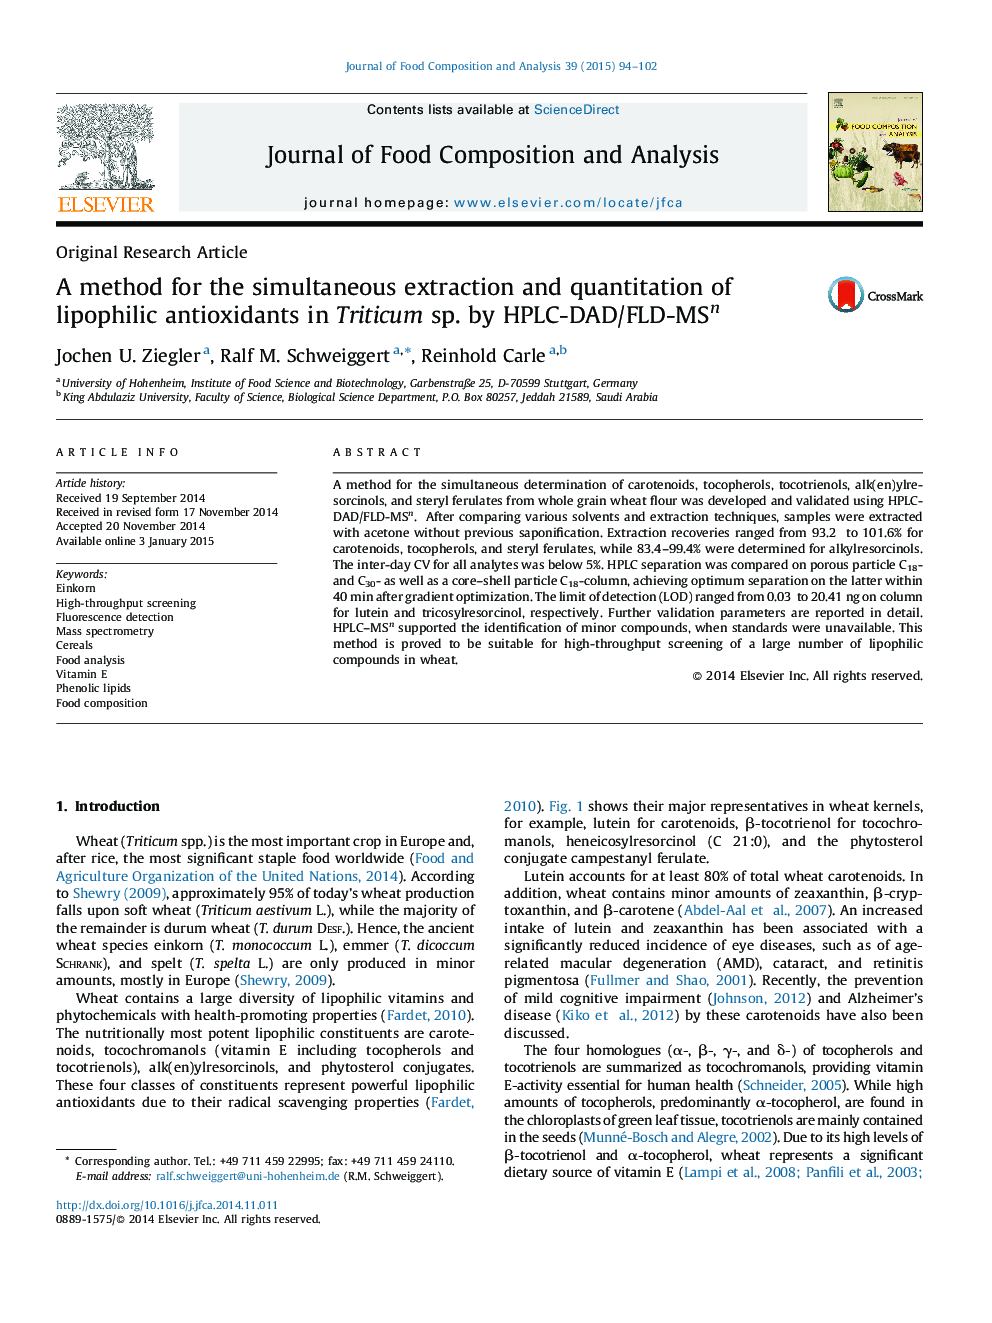 A method for the simultaneous extraction and quantitation of lipophilic antioxidants in Triticum sp. by HPLC-DAD/FLD-MSn